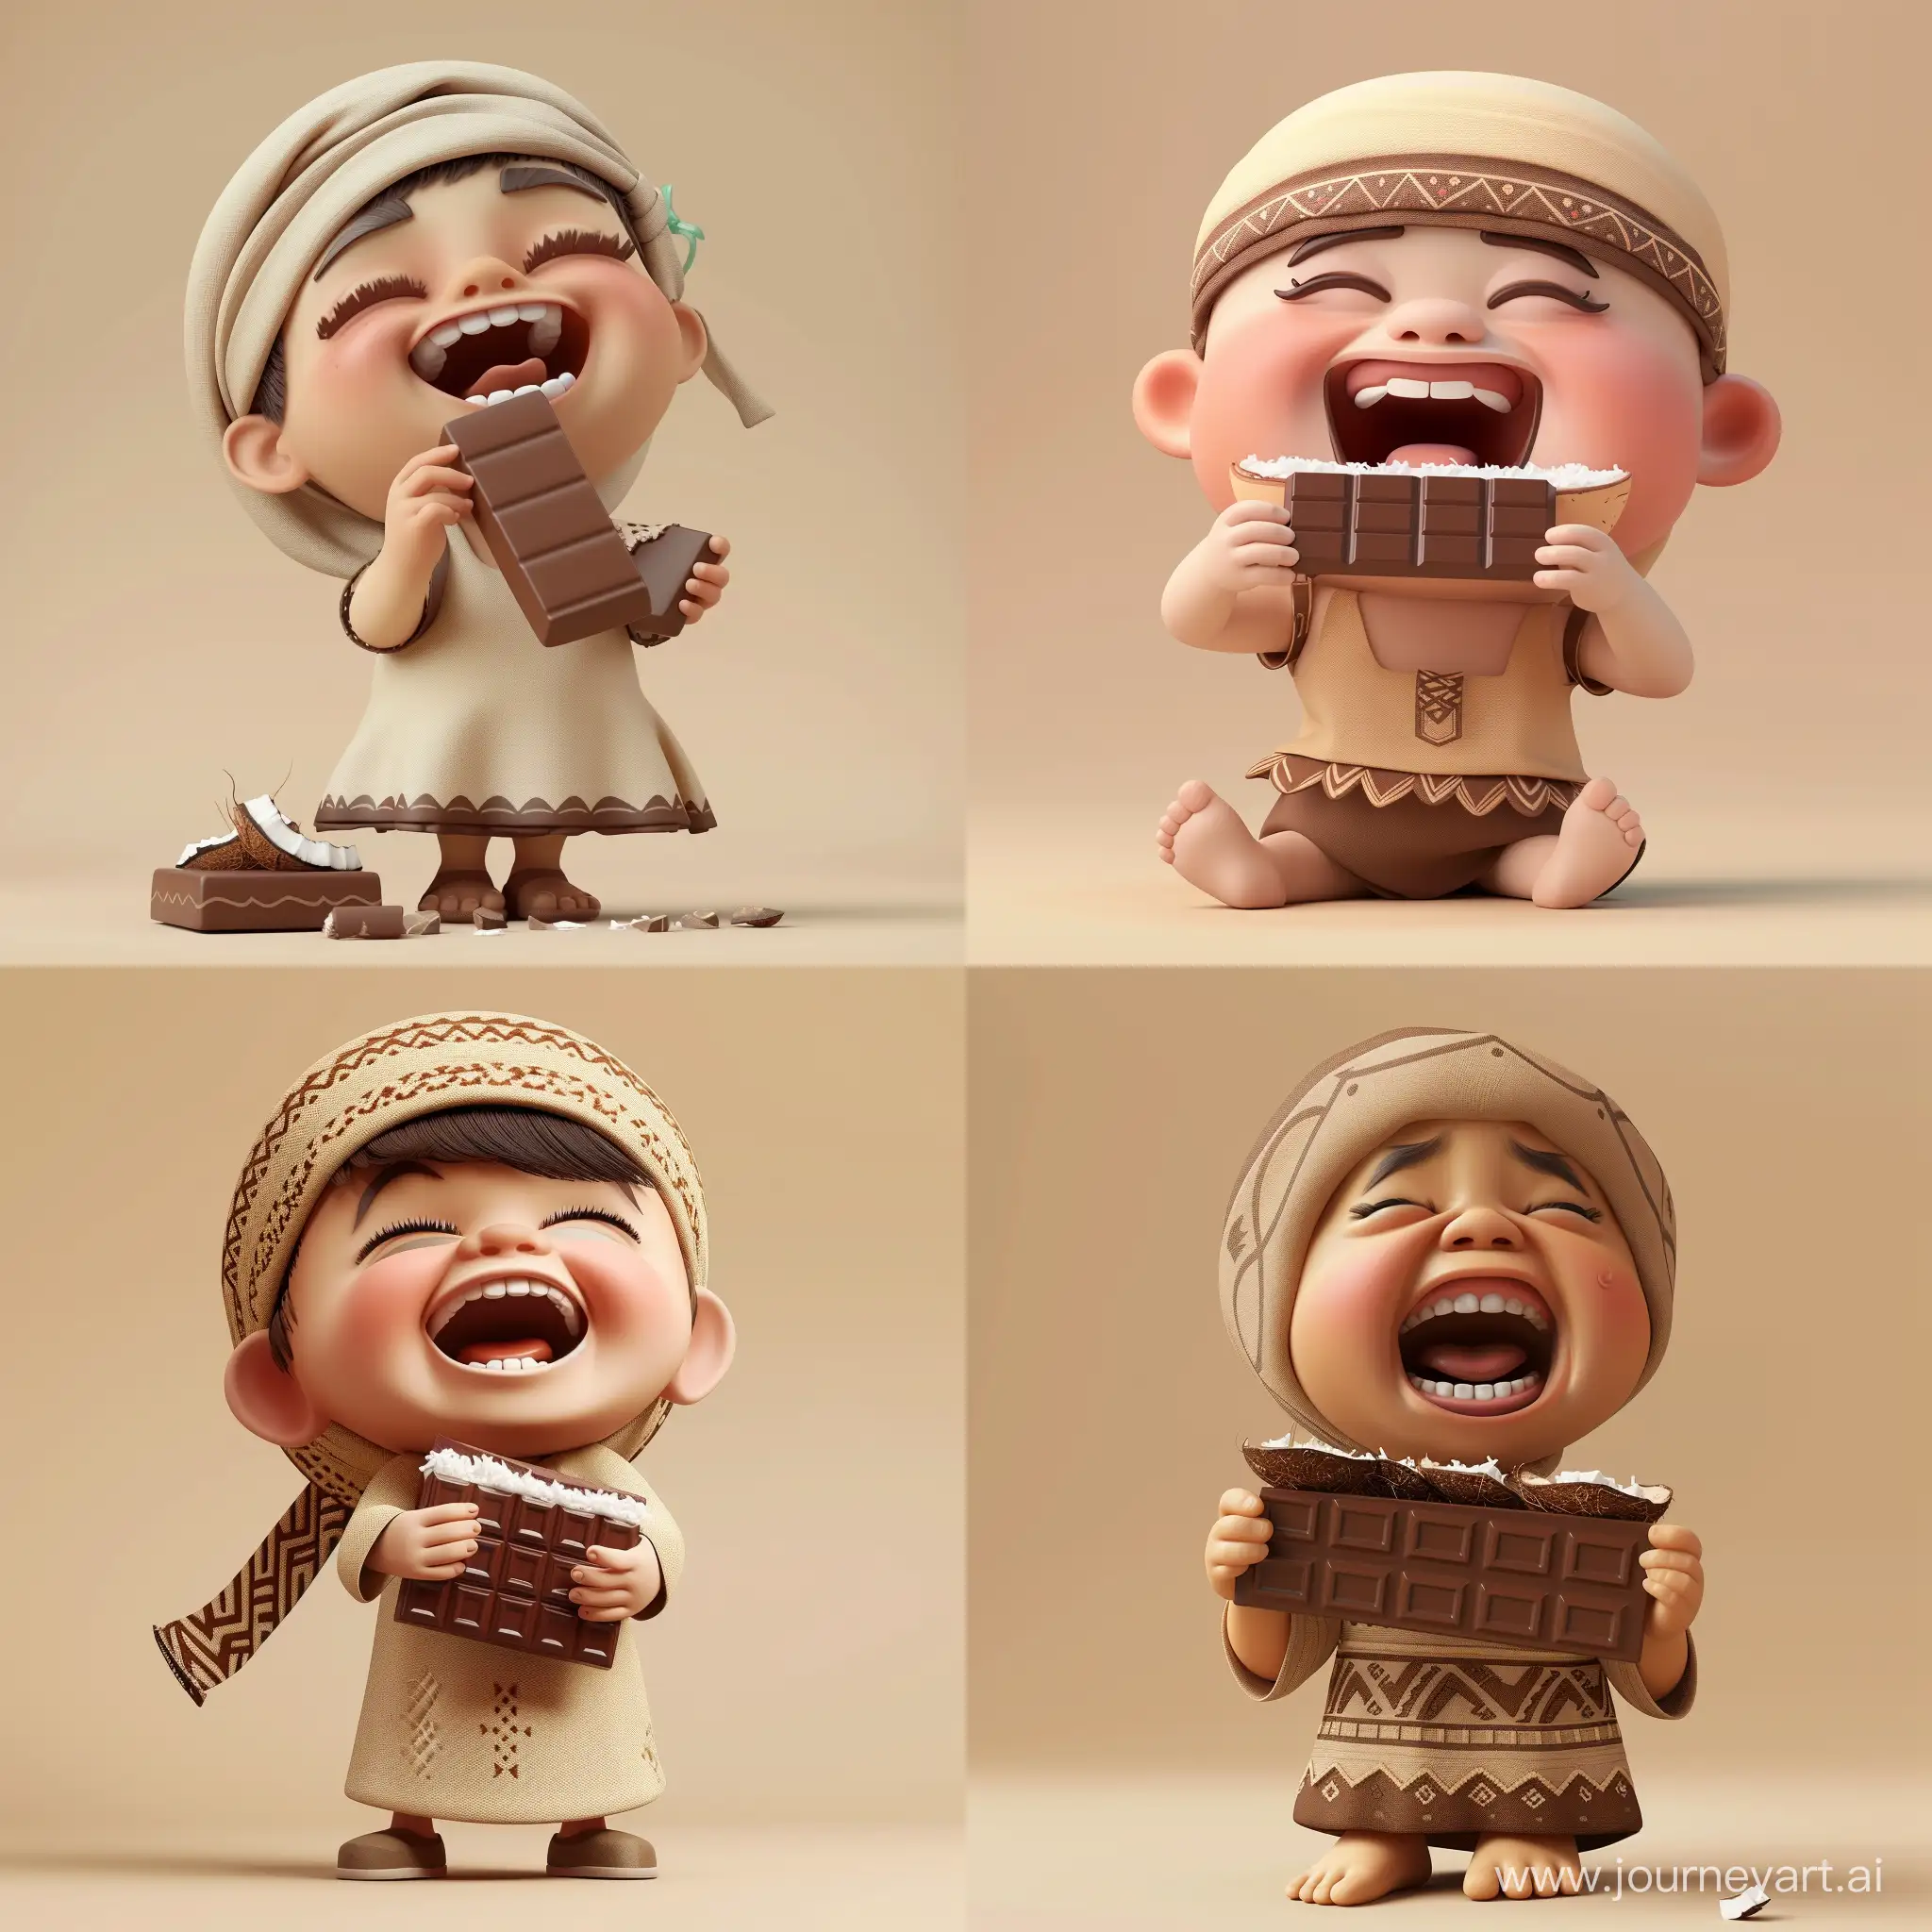 A Yemeni child wearing a cute Yemeni costume is eating chocolate and coconut candy and is very happy and laughing. The child’s cheeks are big, the background is beige, the candy is rectangular in shape, 3D animation style.
